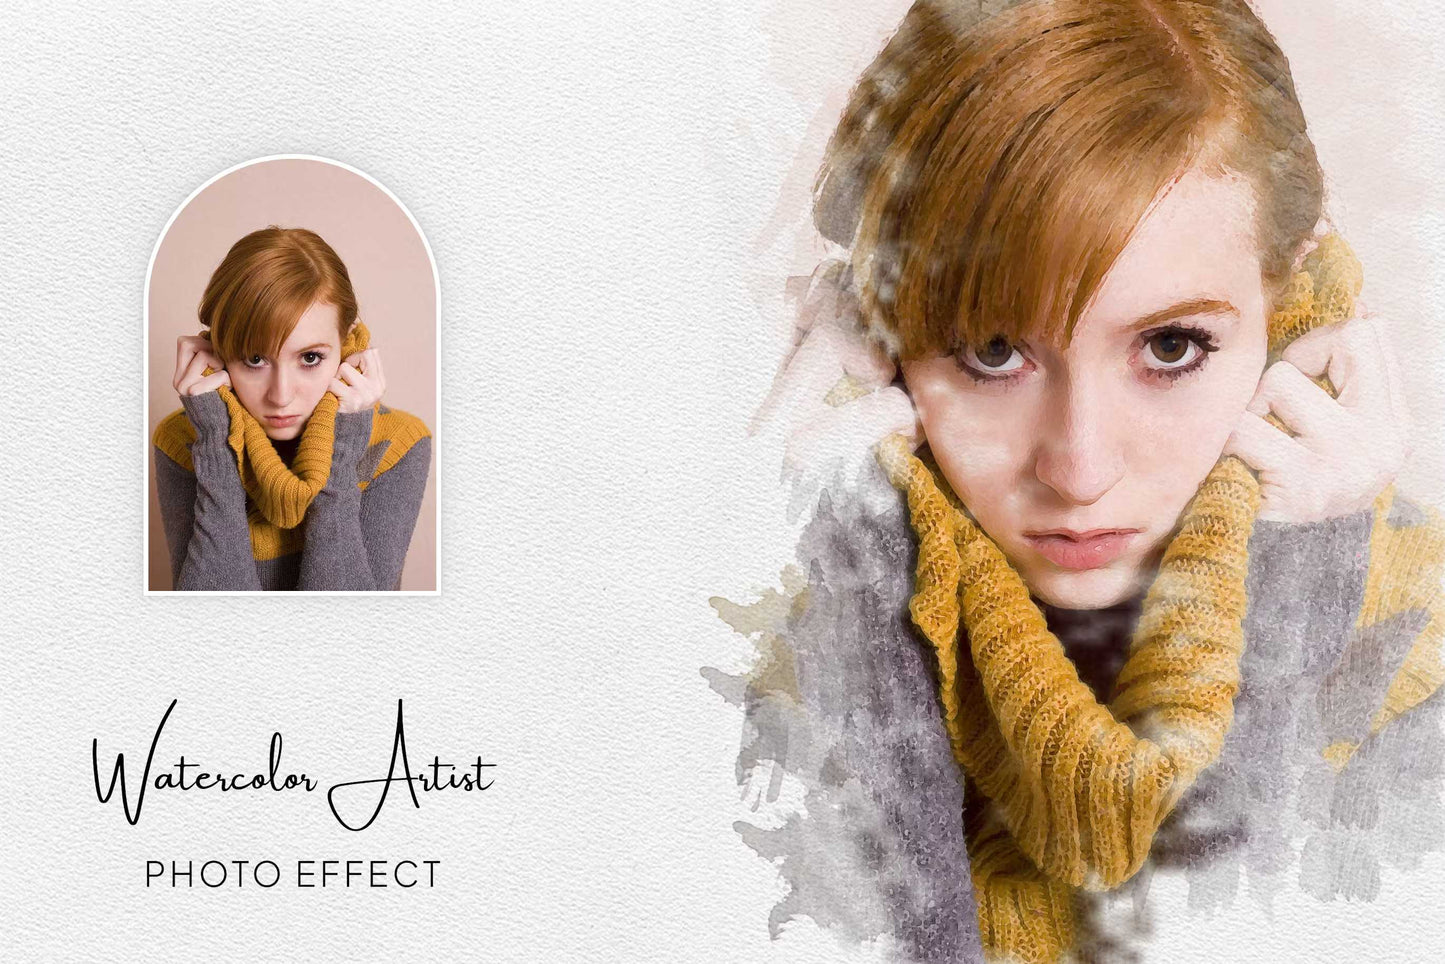 26-In-1 Matchless Photoshop Effects Bundle